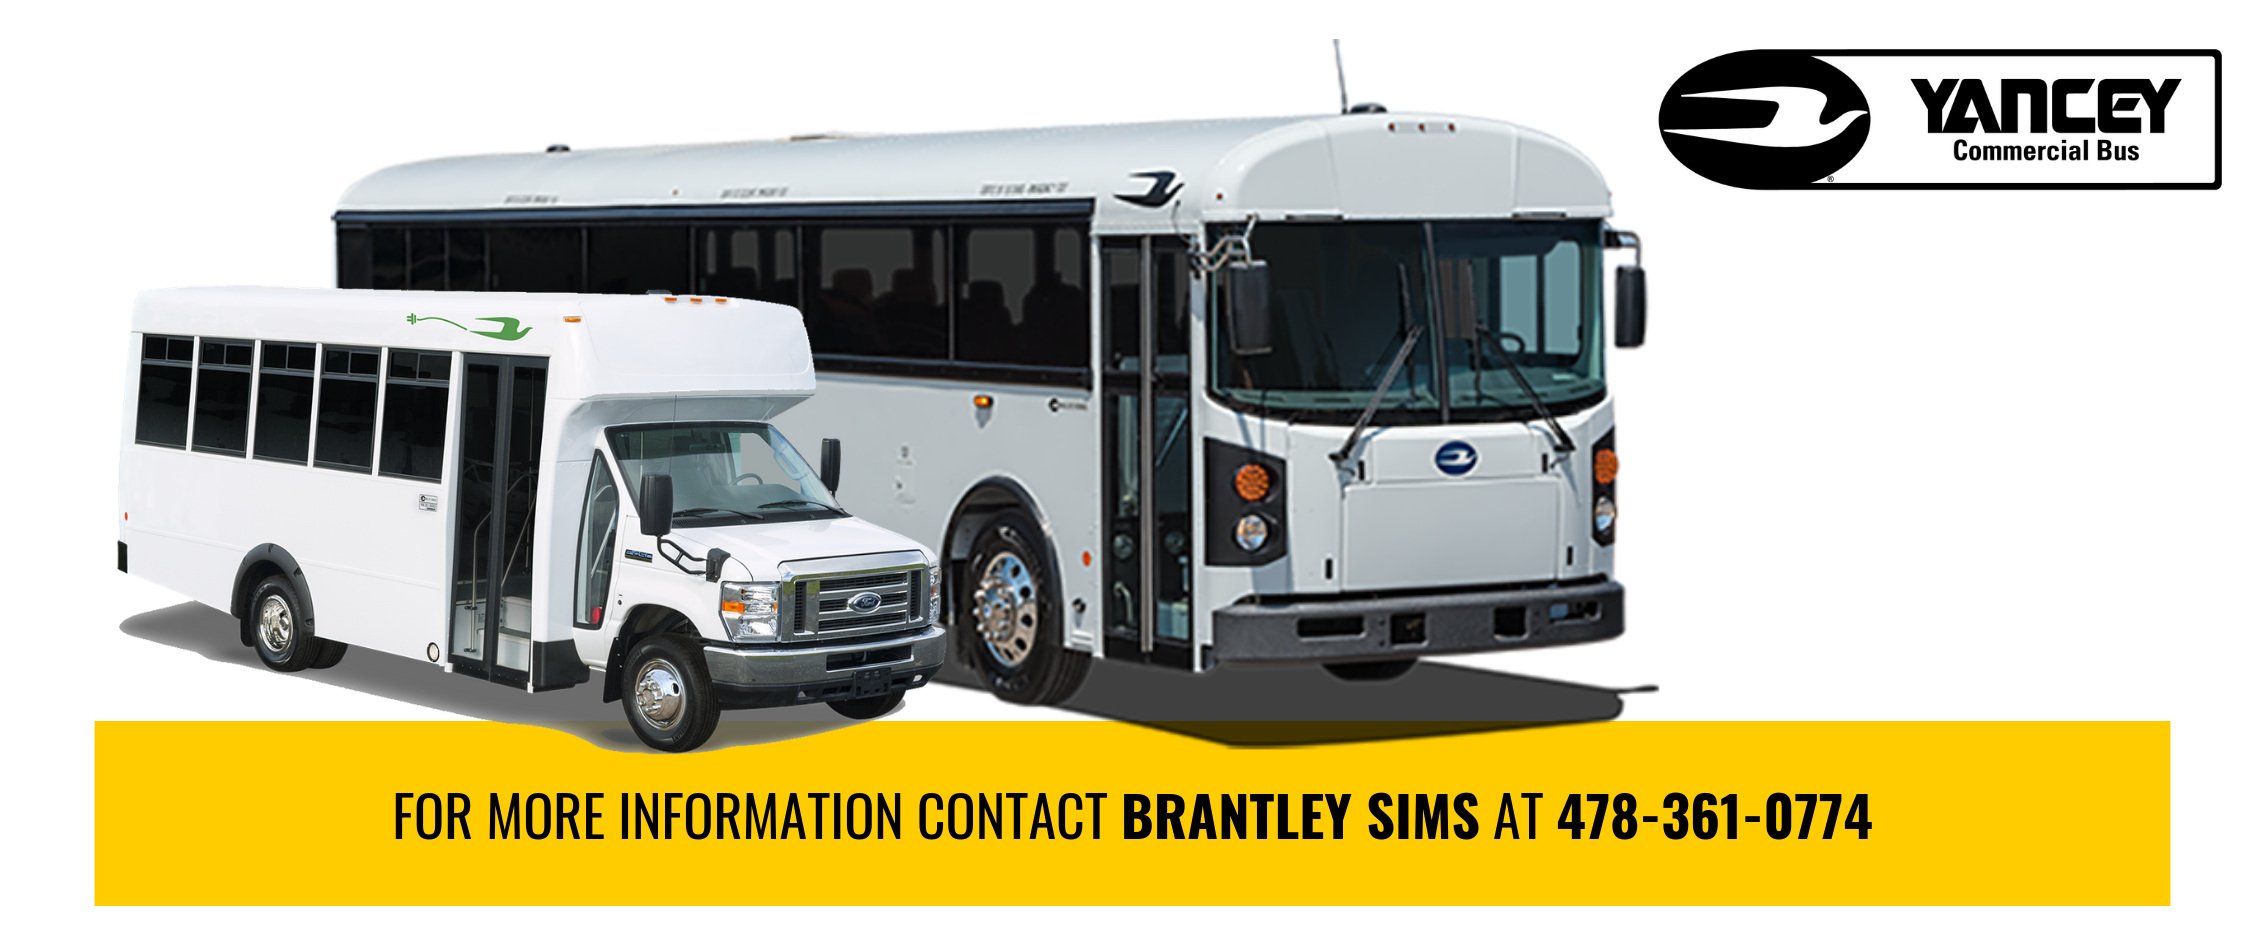 Learn More About Commercial Buses